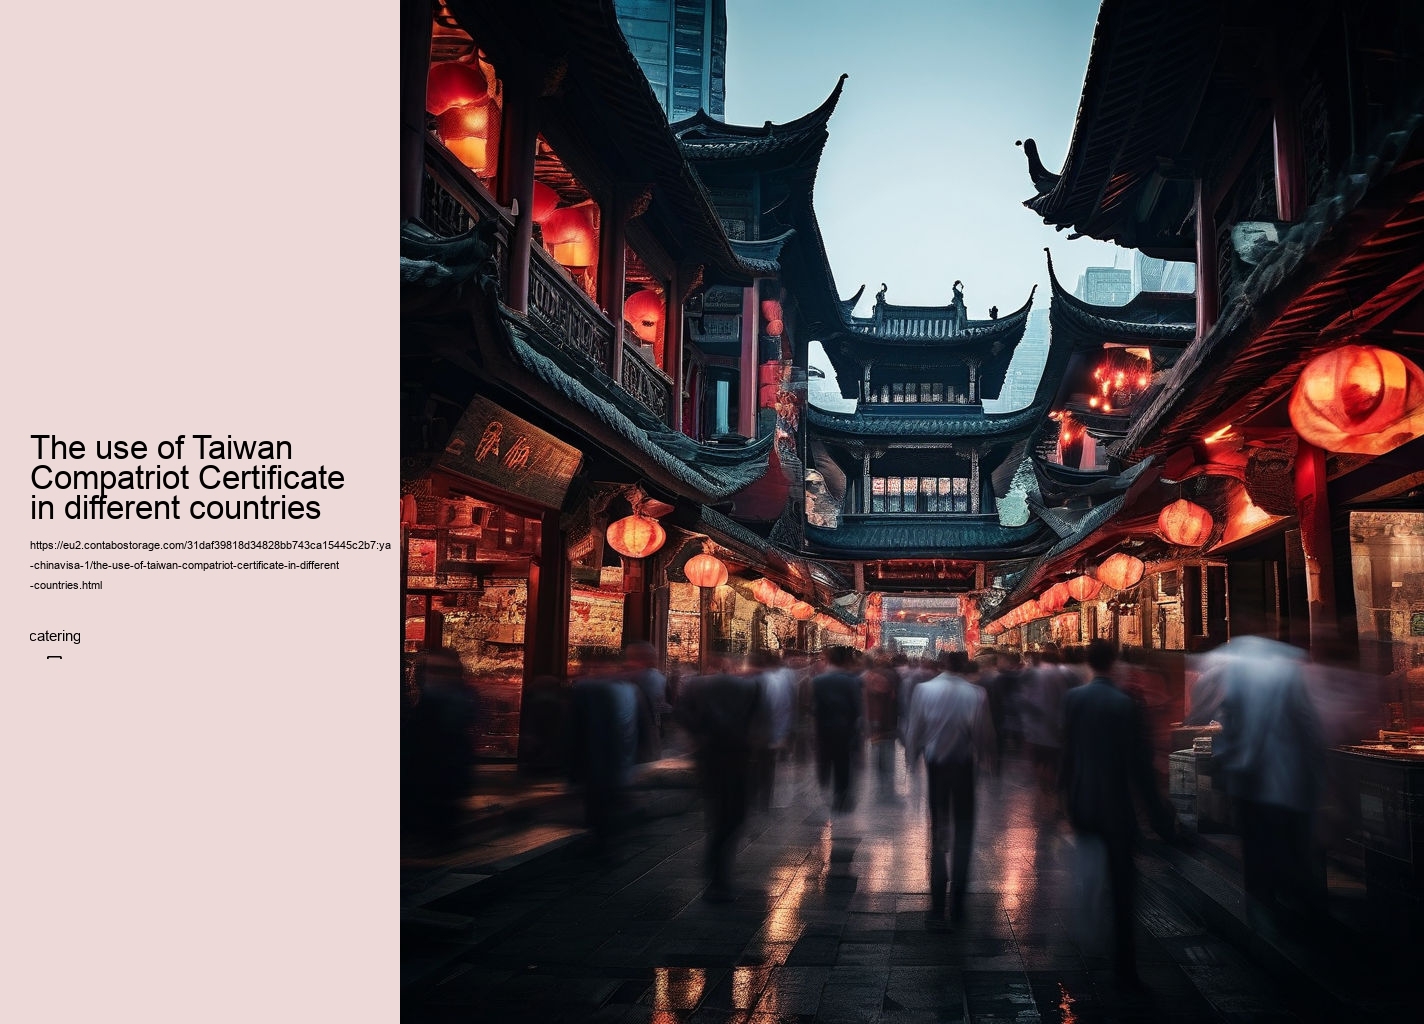 The use of Taiwan Compatriot Certificate in different countries